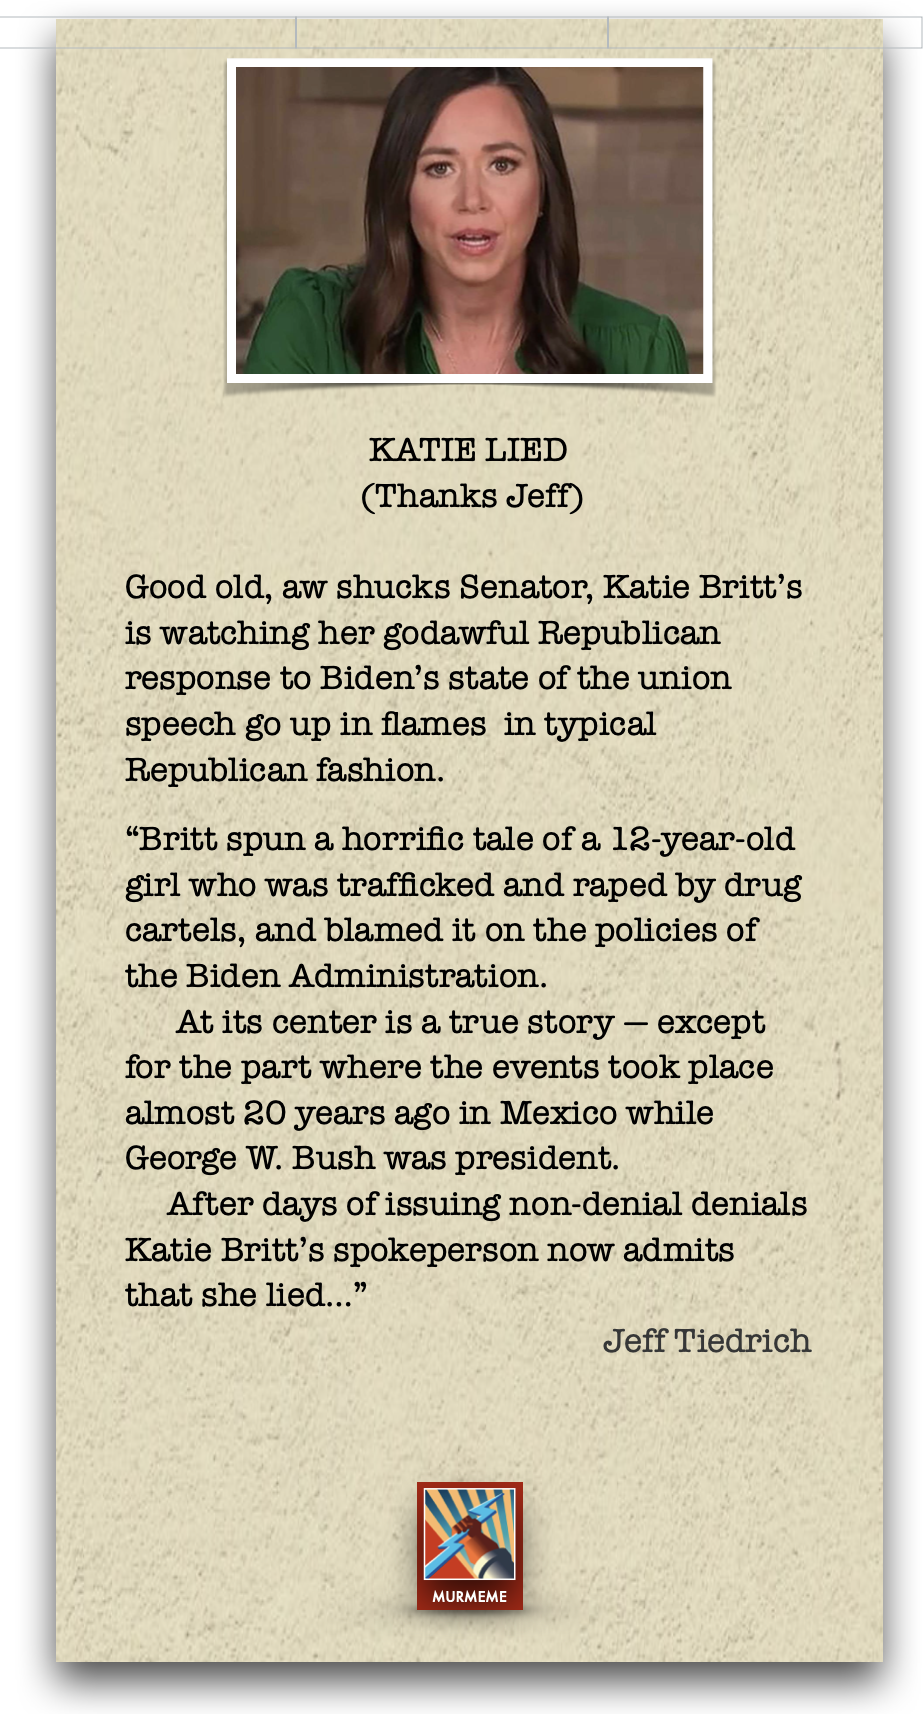 KATIE LIED
(Thanks Jeff)

Good old, aw shucks Senator, Katie Britt's
is watching her godawful Republican
response to Biden's state of the union
speech go up in flames in typical
Republican fashion.

“Britt spun a horrific tale of a 12-year-old
girl who was trafficked and raped by drug
cartels, and blamed it on the policies of
the Biden Administration.

At its center is a true story — except
for the part where the events took place
almost 20 years ago in Mexico while
George W. Bush was president.

After days of issuing non-denial denials
Katie Britt's spokeperson now admits
that she lied...”

Jeff Tiedrich

 

MURMEME